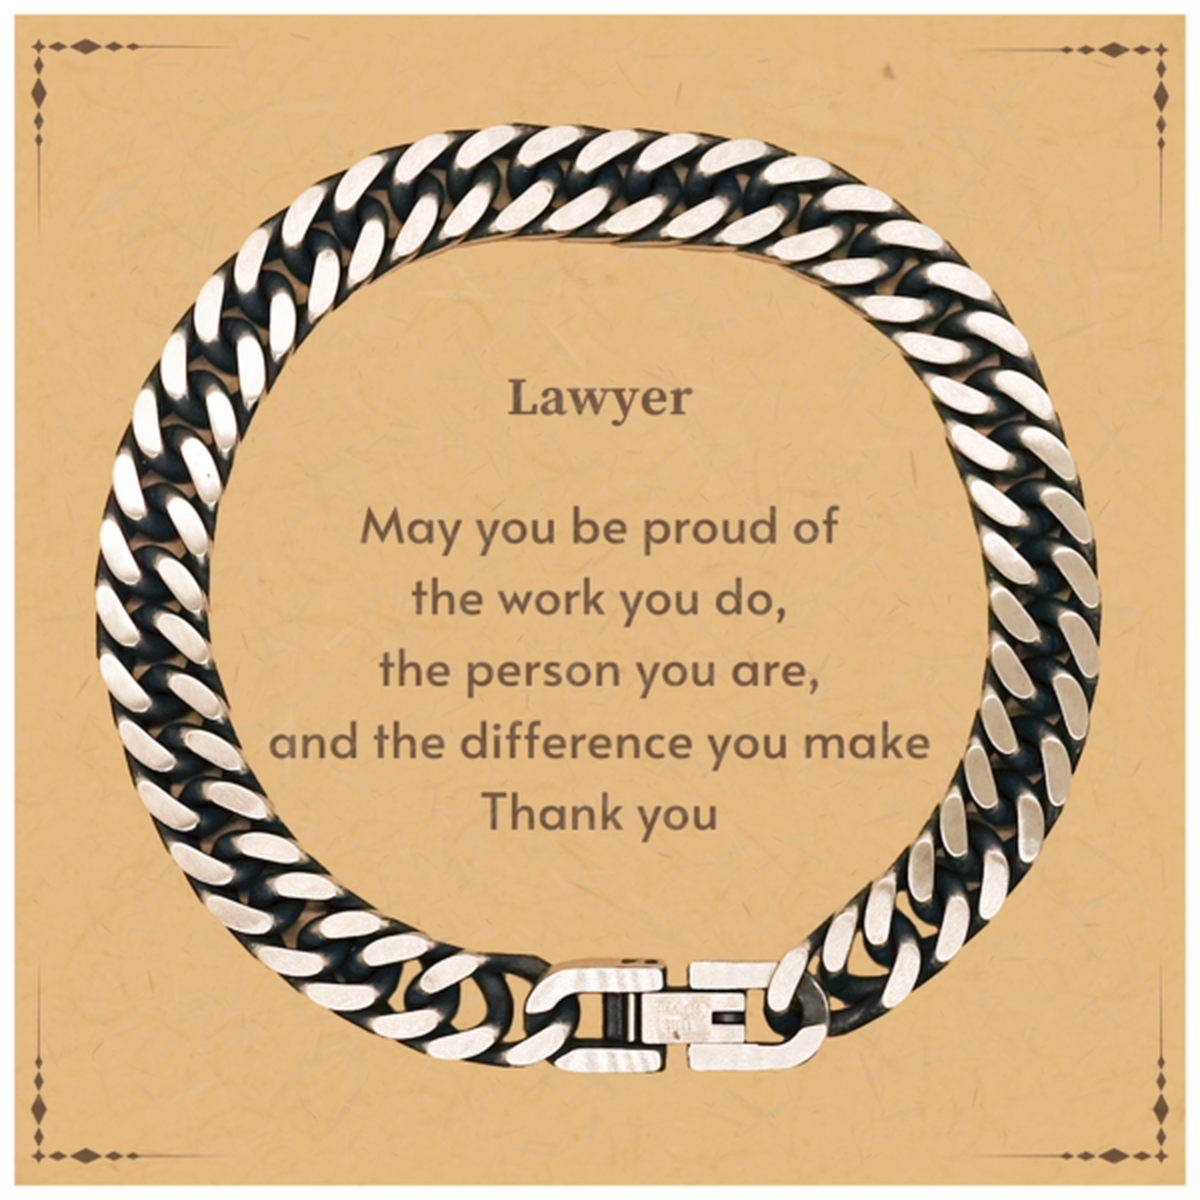 Heartwarming Cuban Link Chain Bracelet Retirement Coworkers Gifts for Lawyer, Lawyer May You be proud of the work you do, the person you are Gifts for Boss Men Women Friends